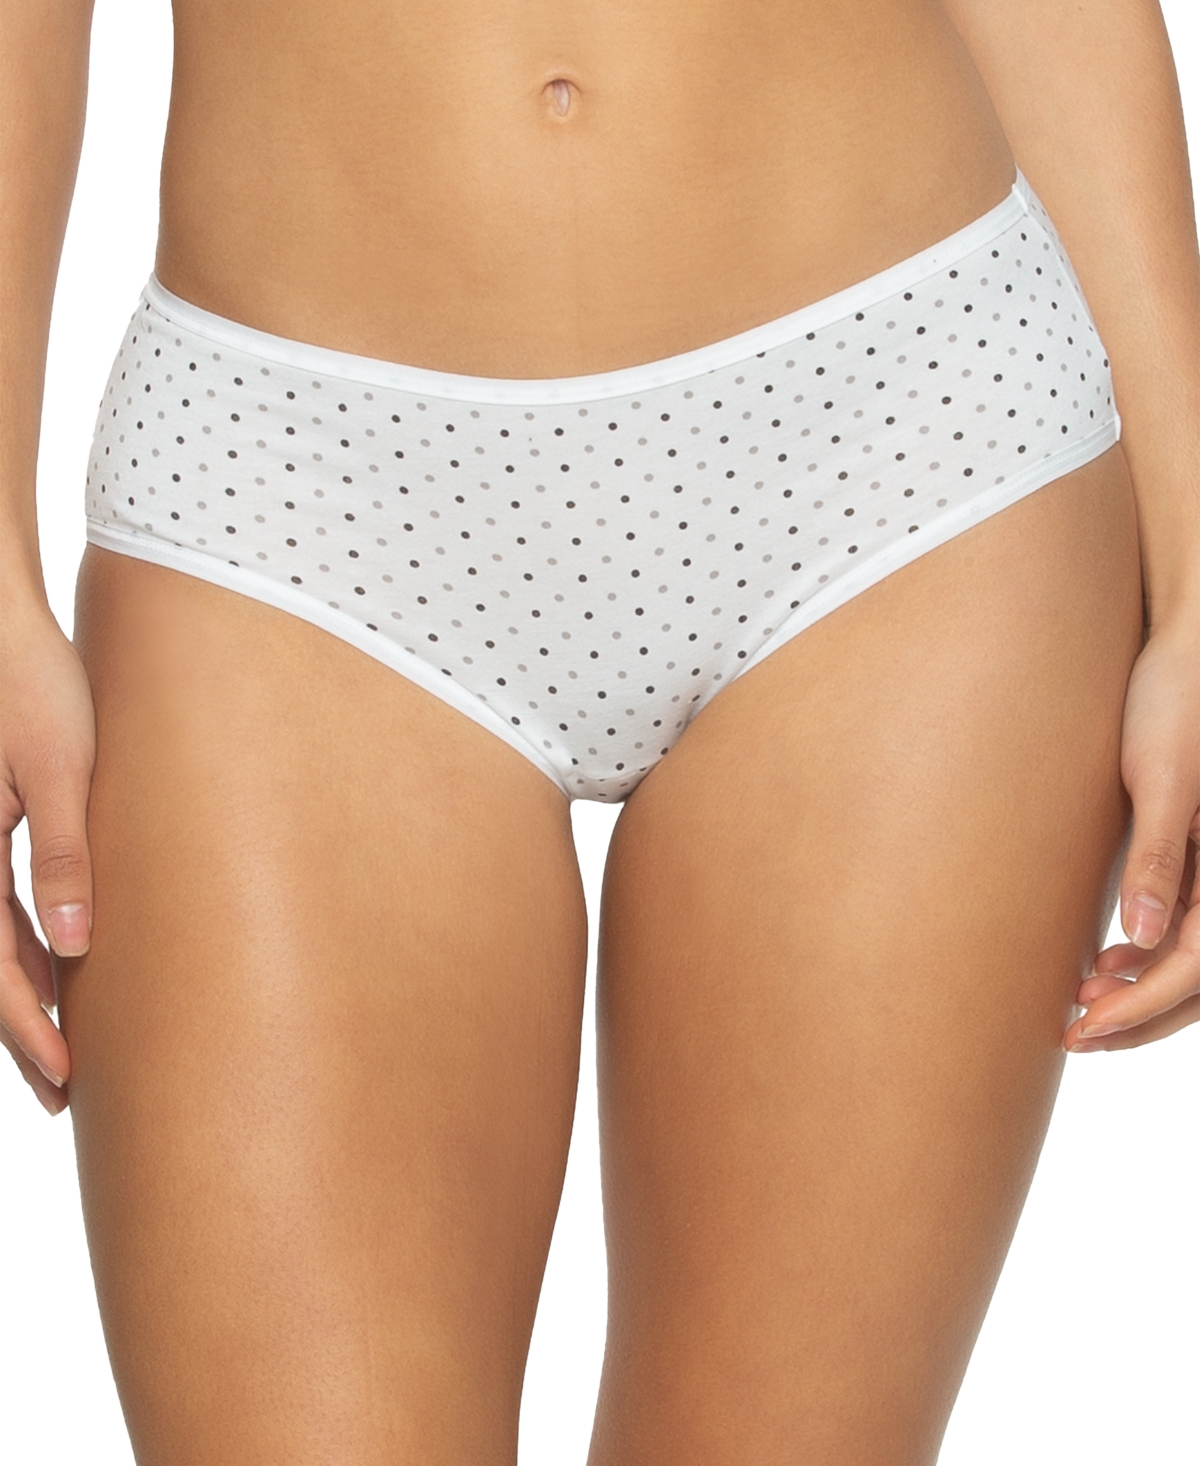 Women's 5-Pk. Hipster Underwear 650180P5, Created for Macy's - Wmn/wht/br